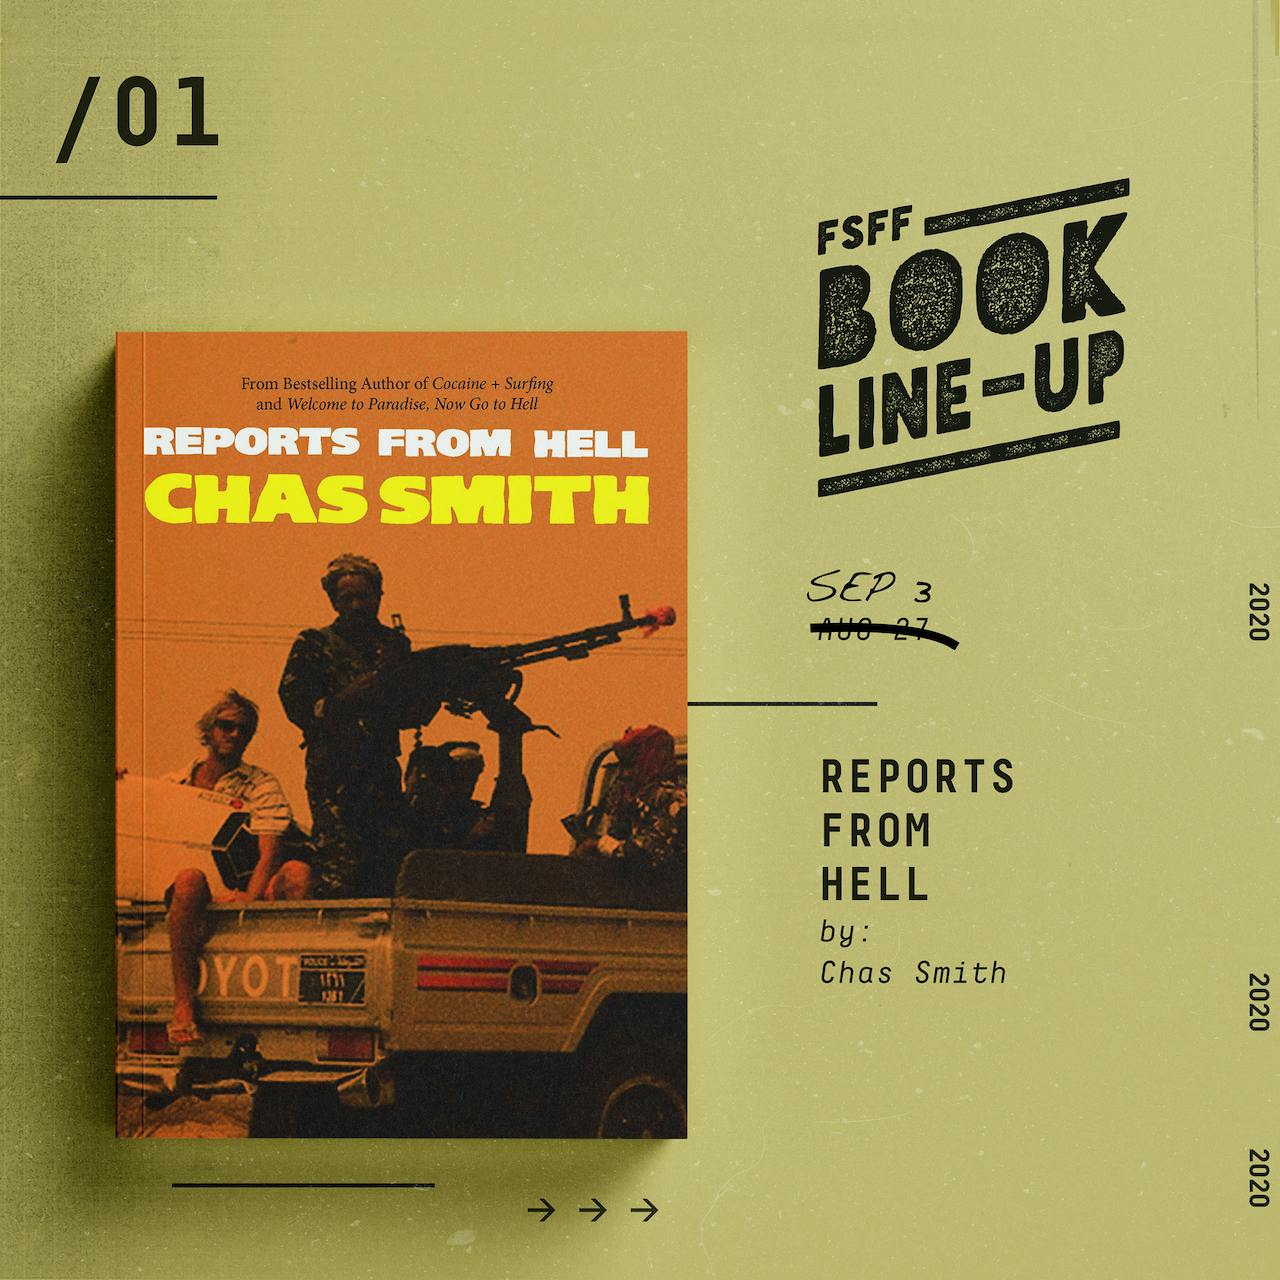 REPORTS FROM HELL by Chas Smith - FSFF Book Line-up